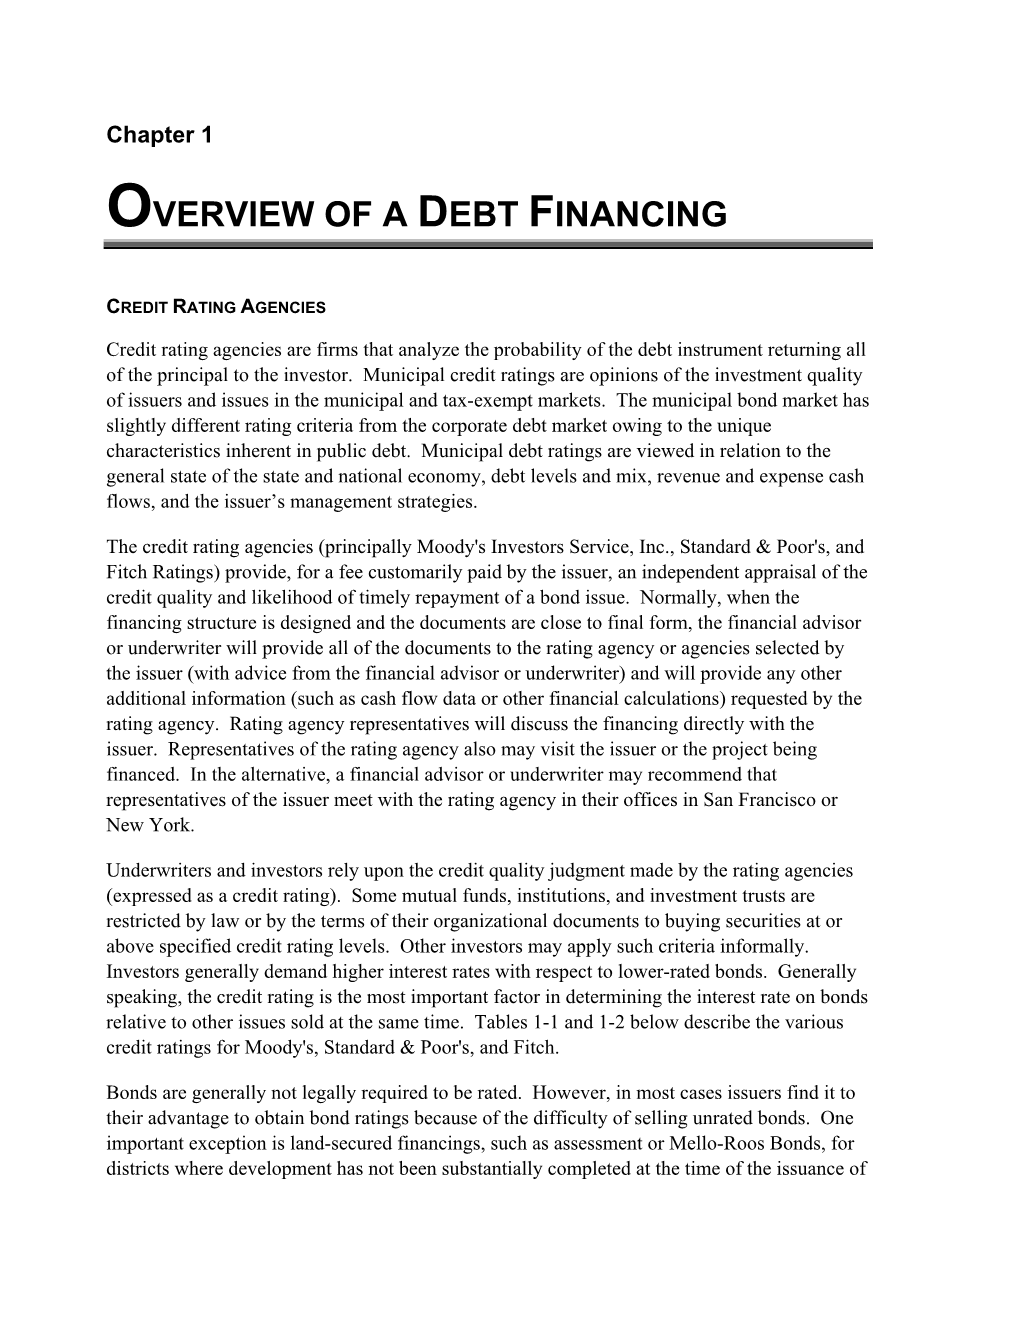 Overview of a Debt Financing